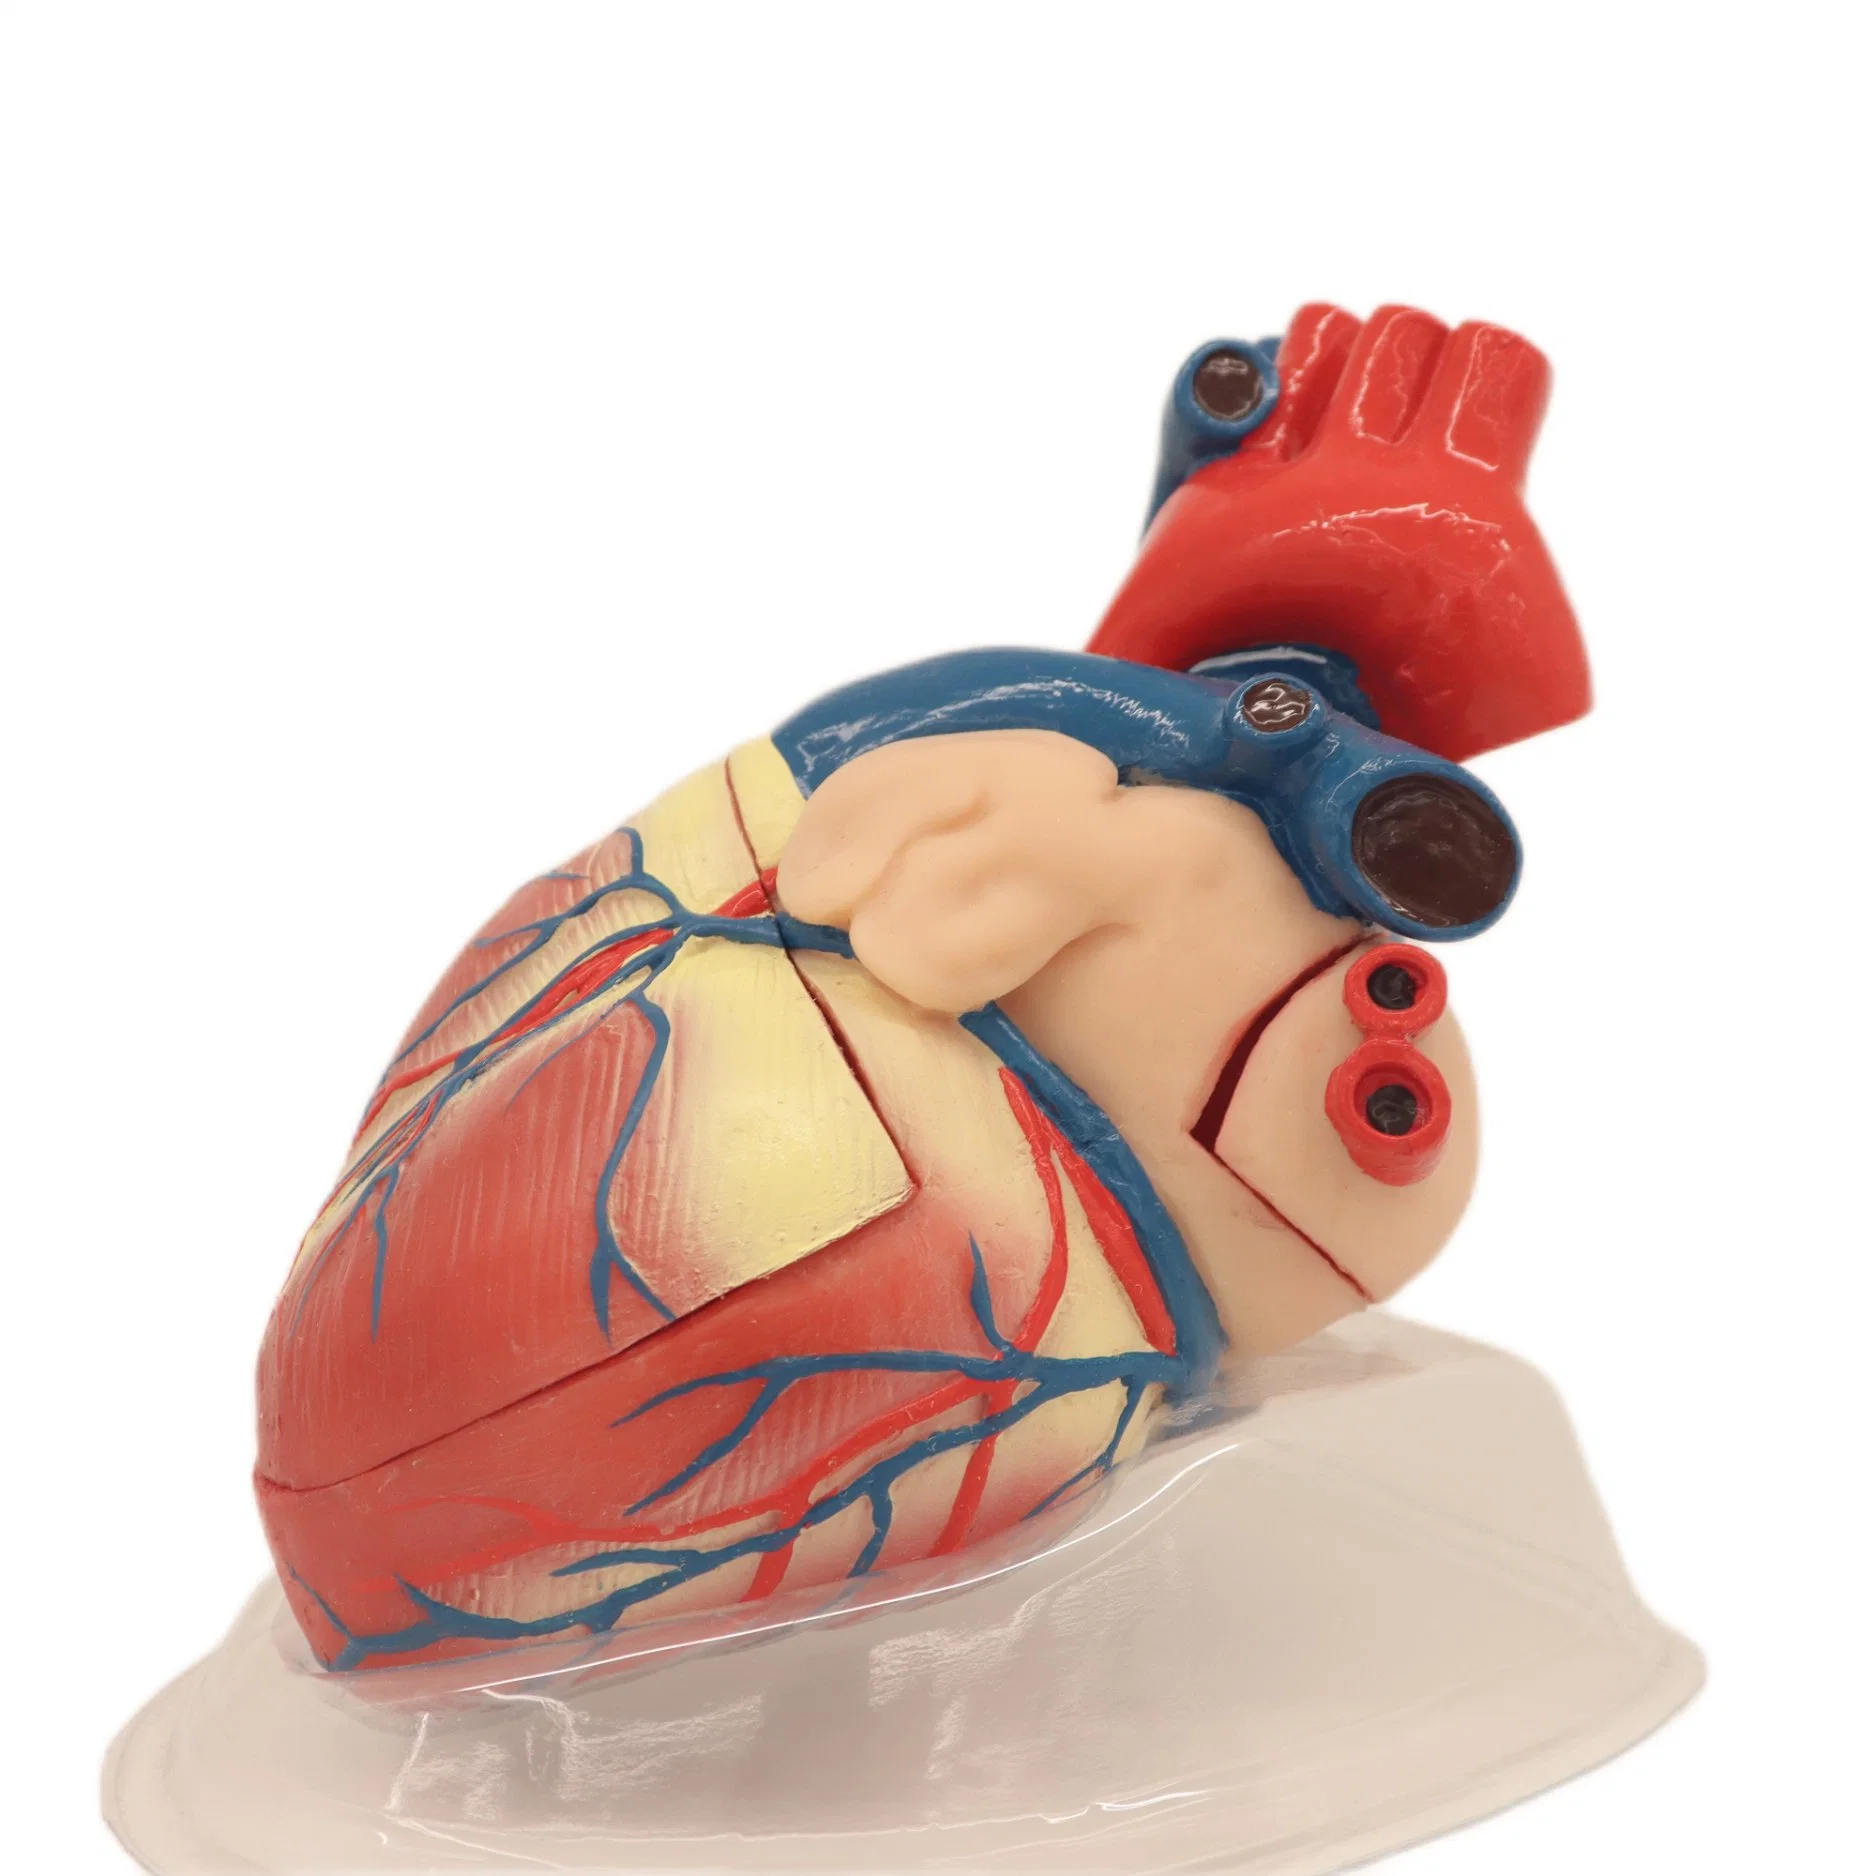 High quality/High cost performance PVC Humam Anatomical Model Expansion Model of Heart